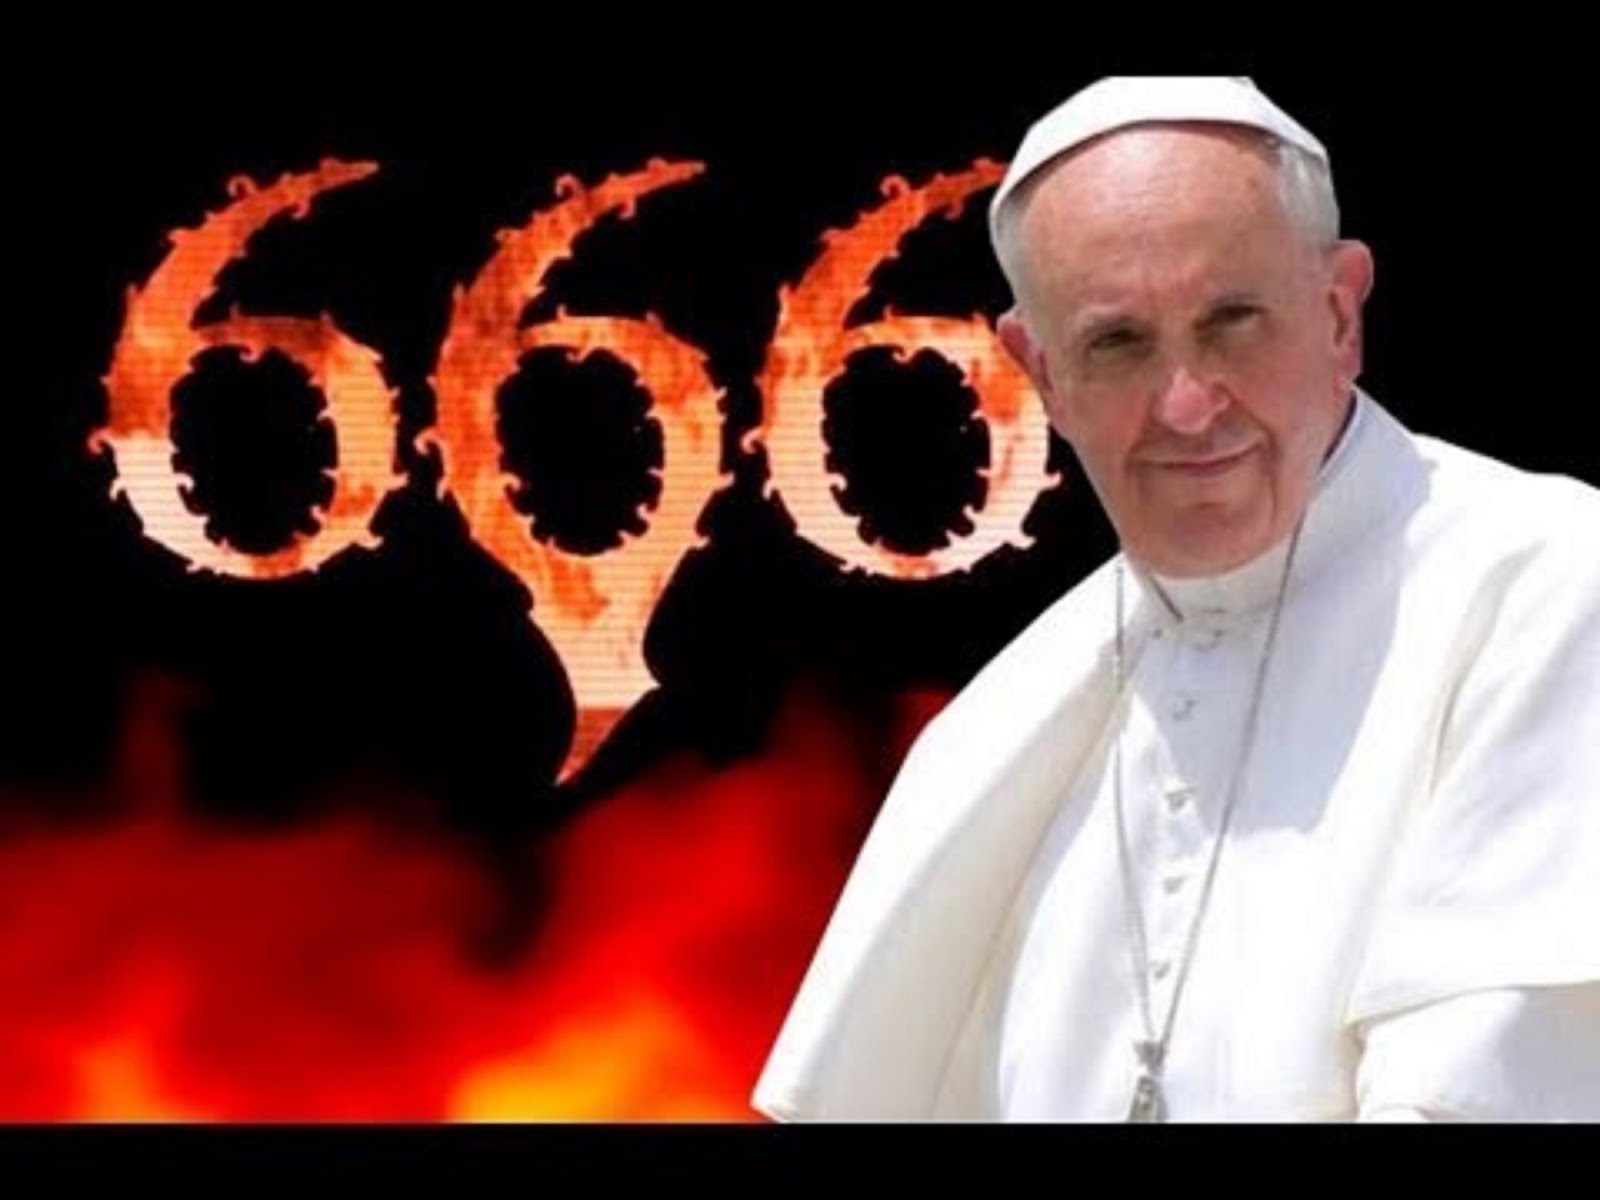 THE ANTI-CHRIST, POPE FRANCIS OF THE BABYLONIAN WHORE THE VATICAN